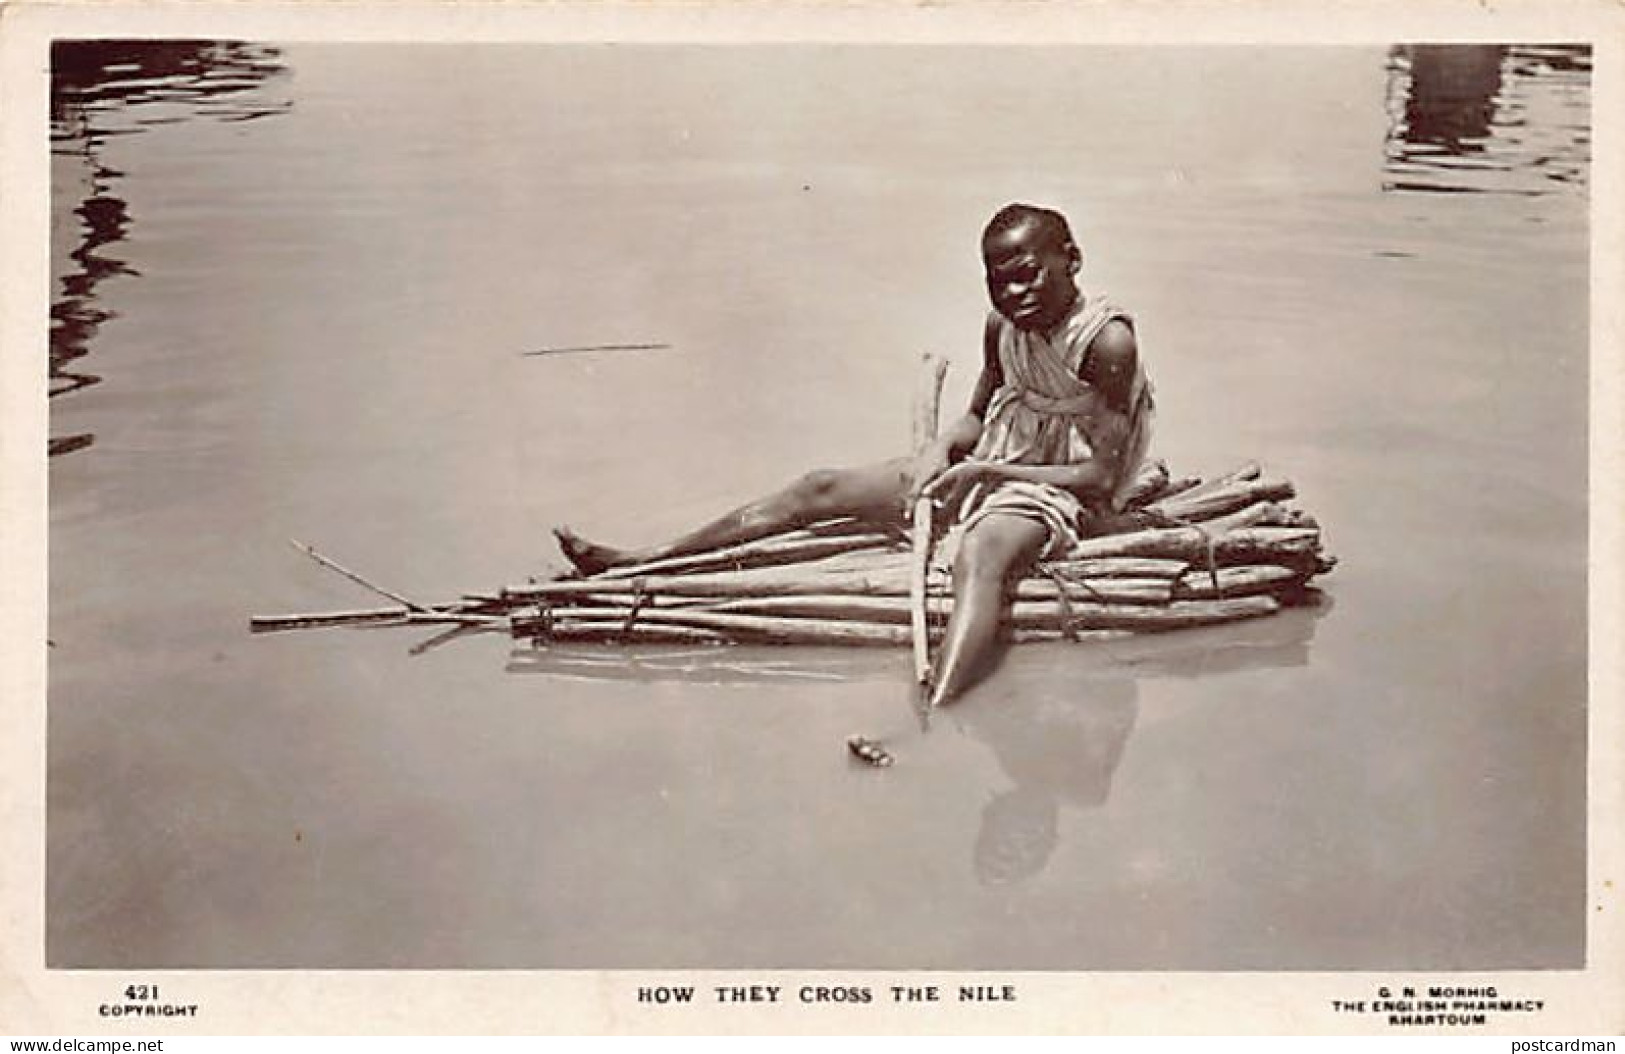 Sudan - How They Cross The Nile - Native Child - Publ. G. N. Morhig 421 - Soudan